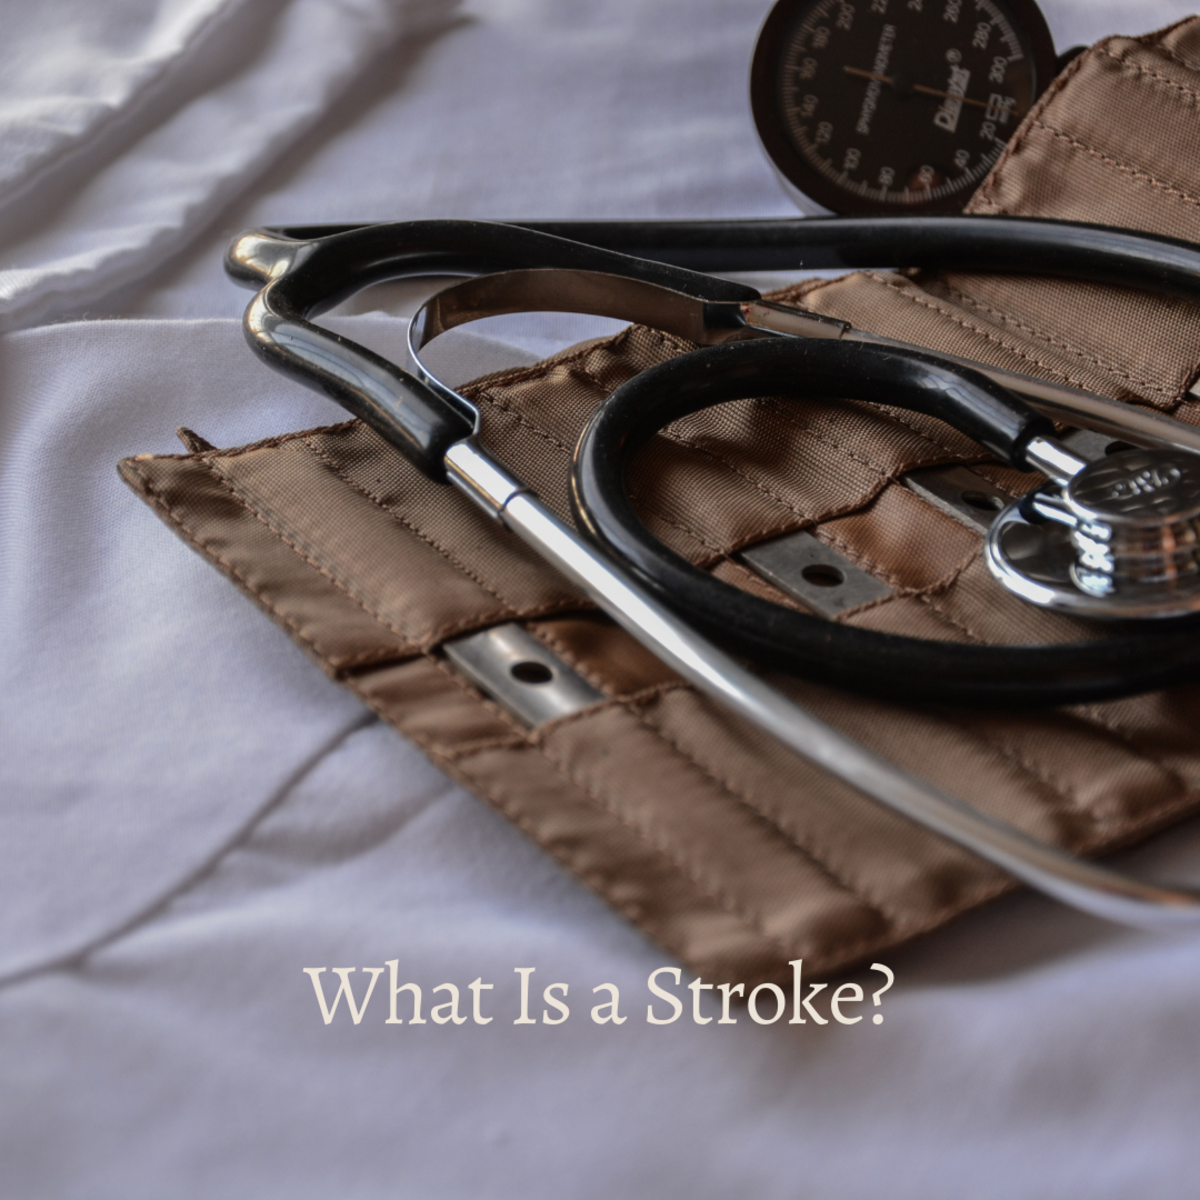 Stroke: What It Is and What to Do